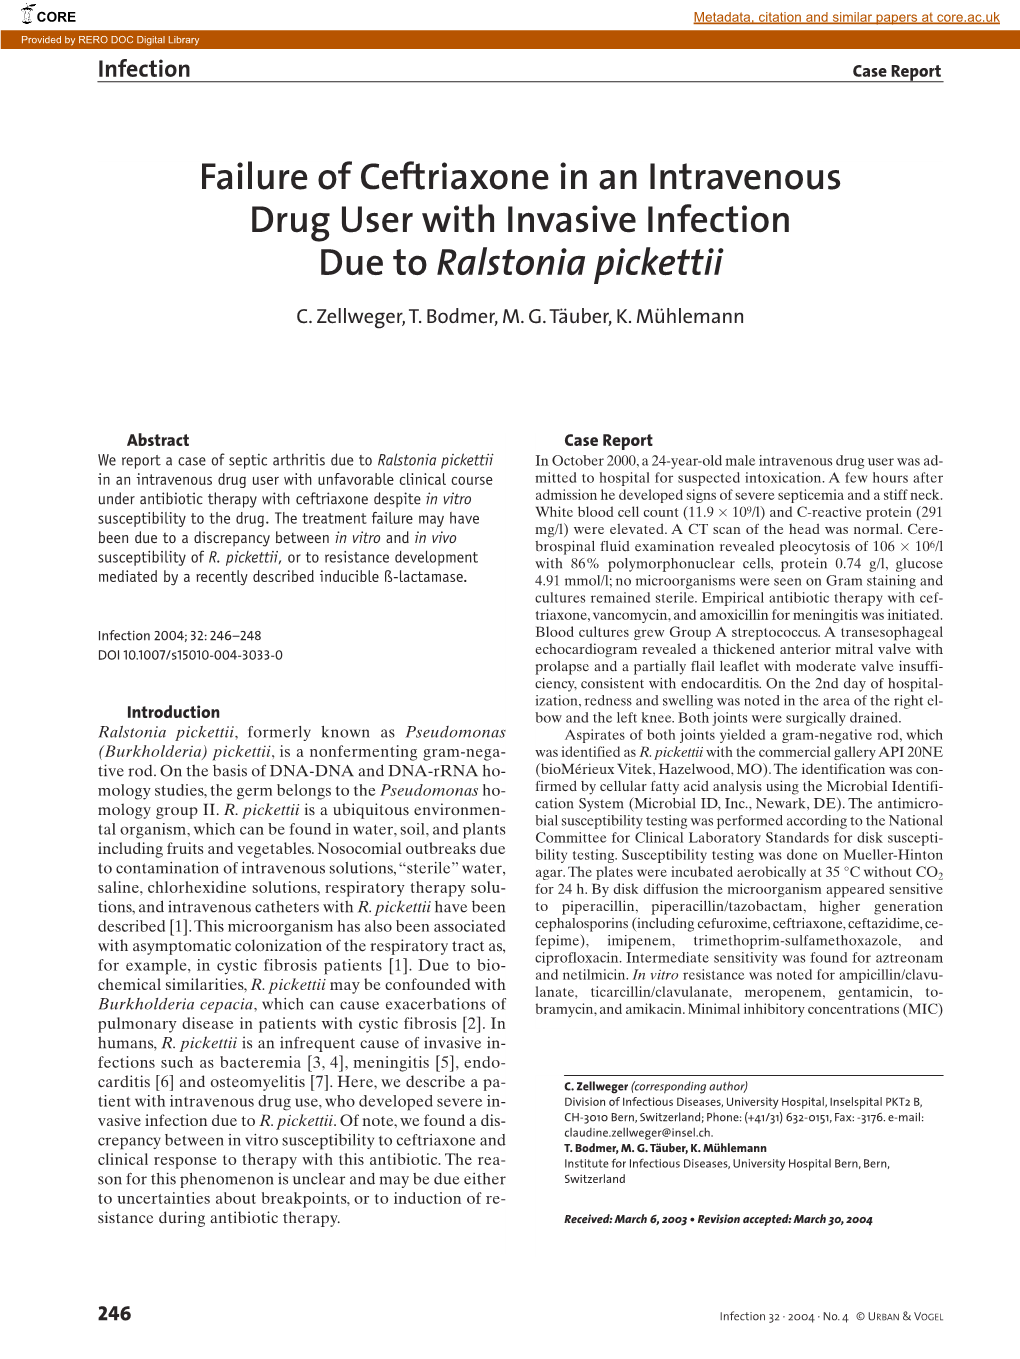 Failure of Ceftriaxone in an Intravenous Drug User with Invasive Infection Due to Ralstonia Pickettii